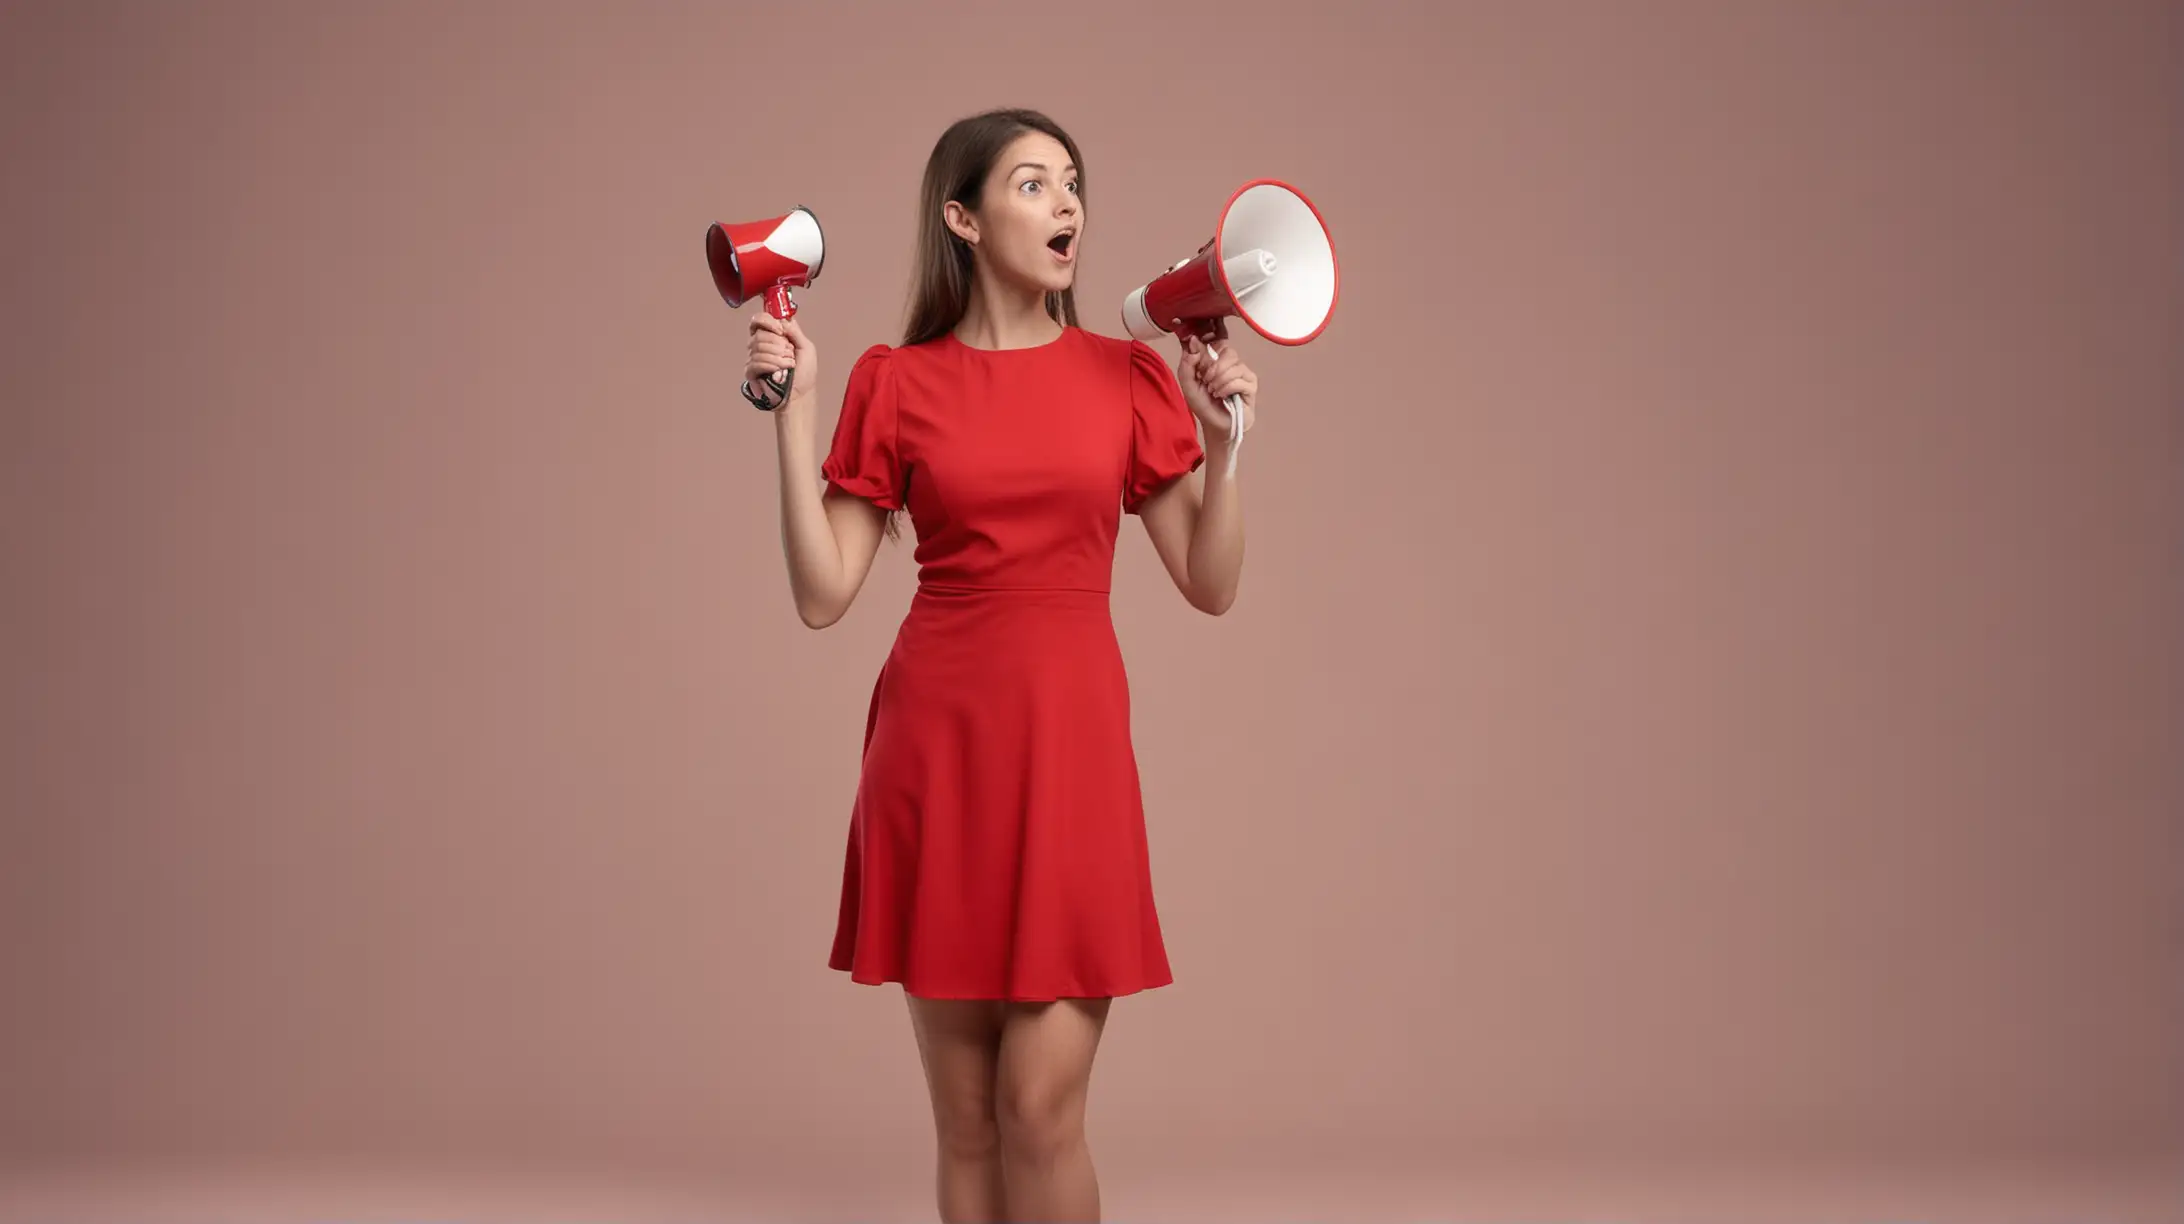 Woman in Red Dress with Megaphone Recommending a Friend